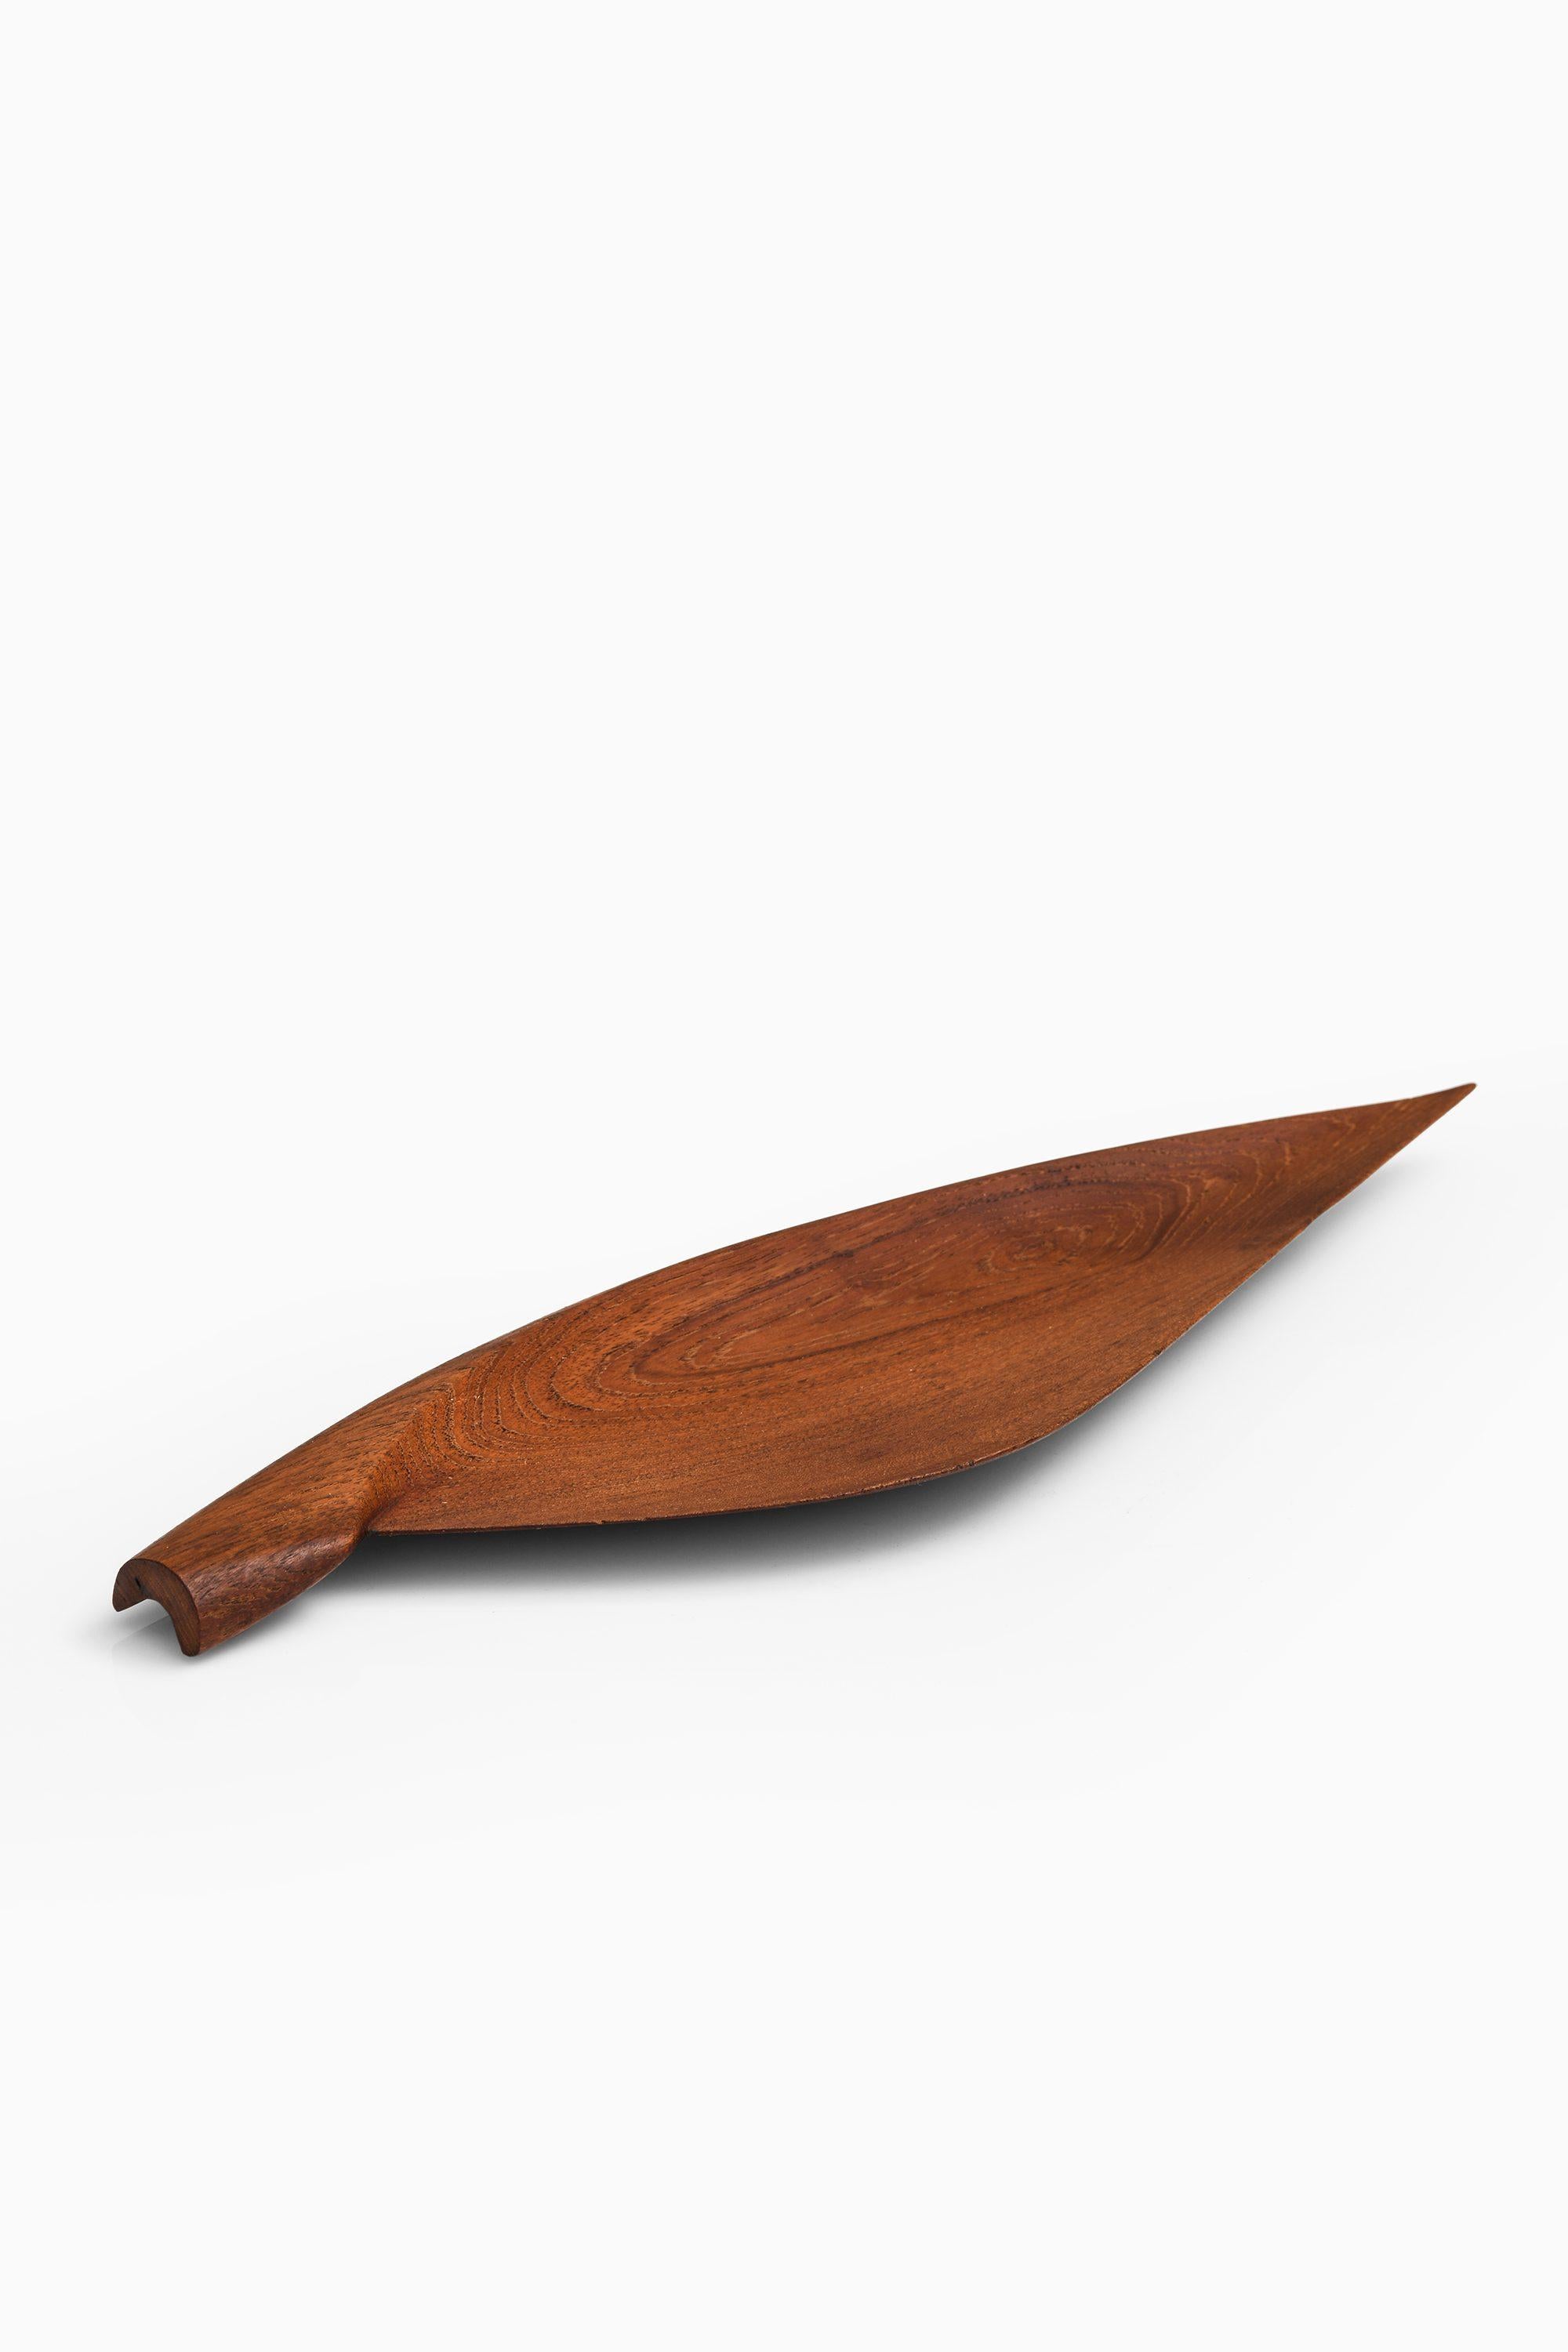 Wooden Dish in Teak by Yngve Ekström, 1950s

Additional Information:
Material: Wood
Style: Scandinavian, Mid century
Produced in Sweden
Dimensions: (W x D x H): 54.5 x 16 x 2 cm
Condition: Good vintage condition, with small signs of usage